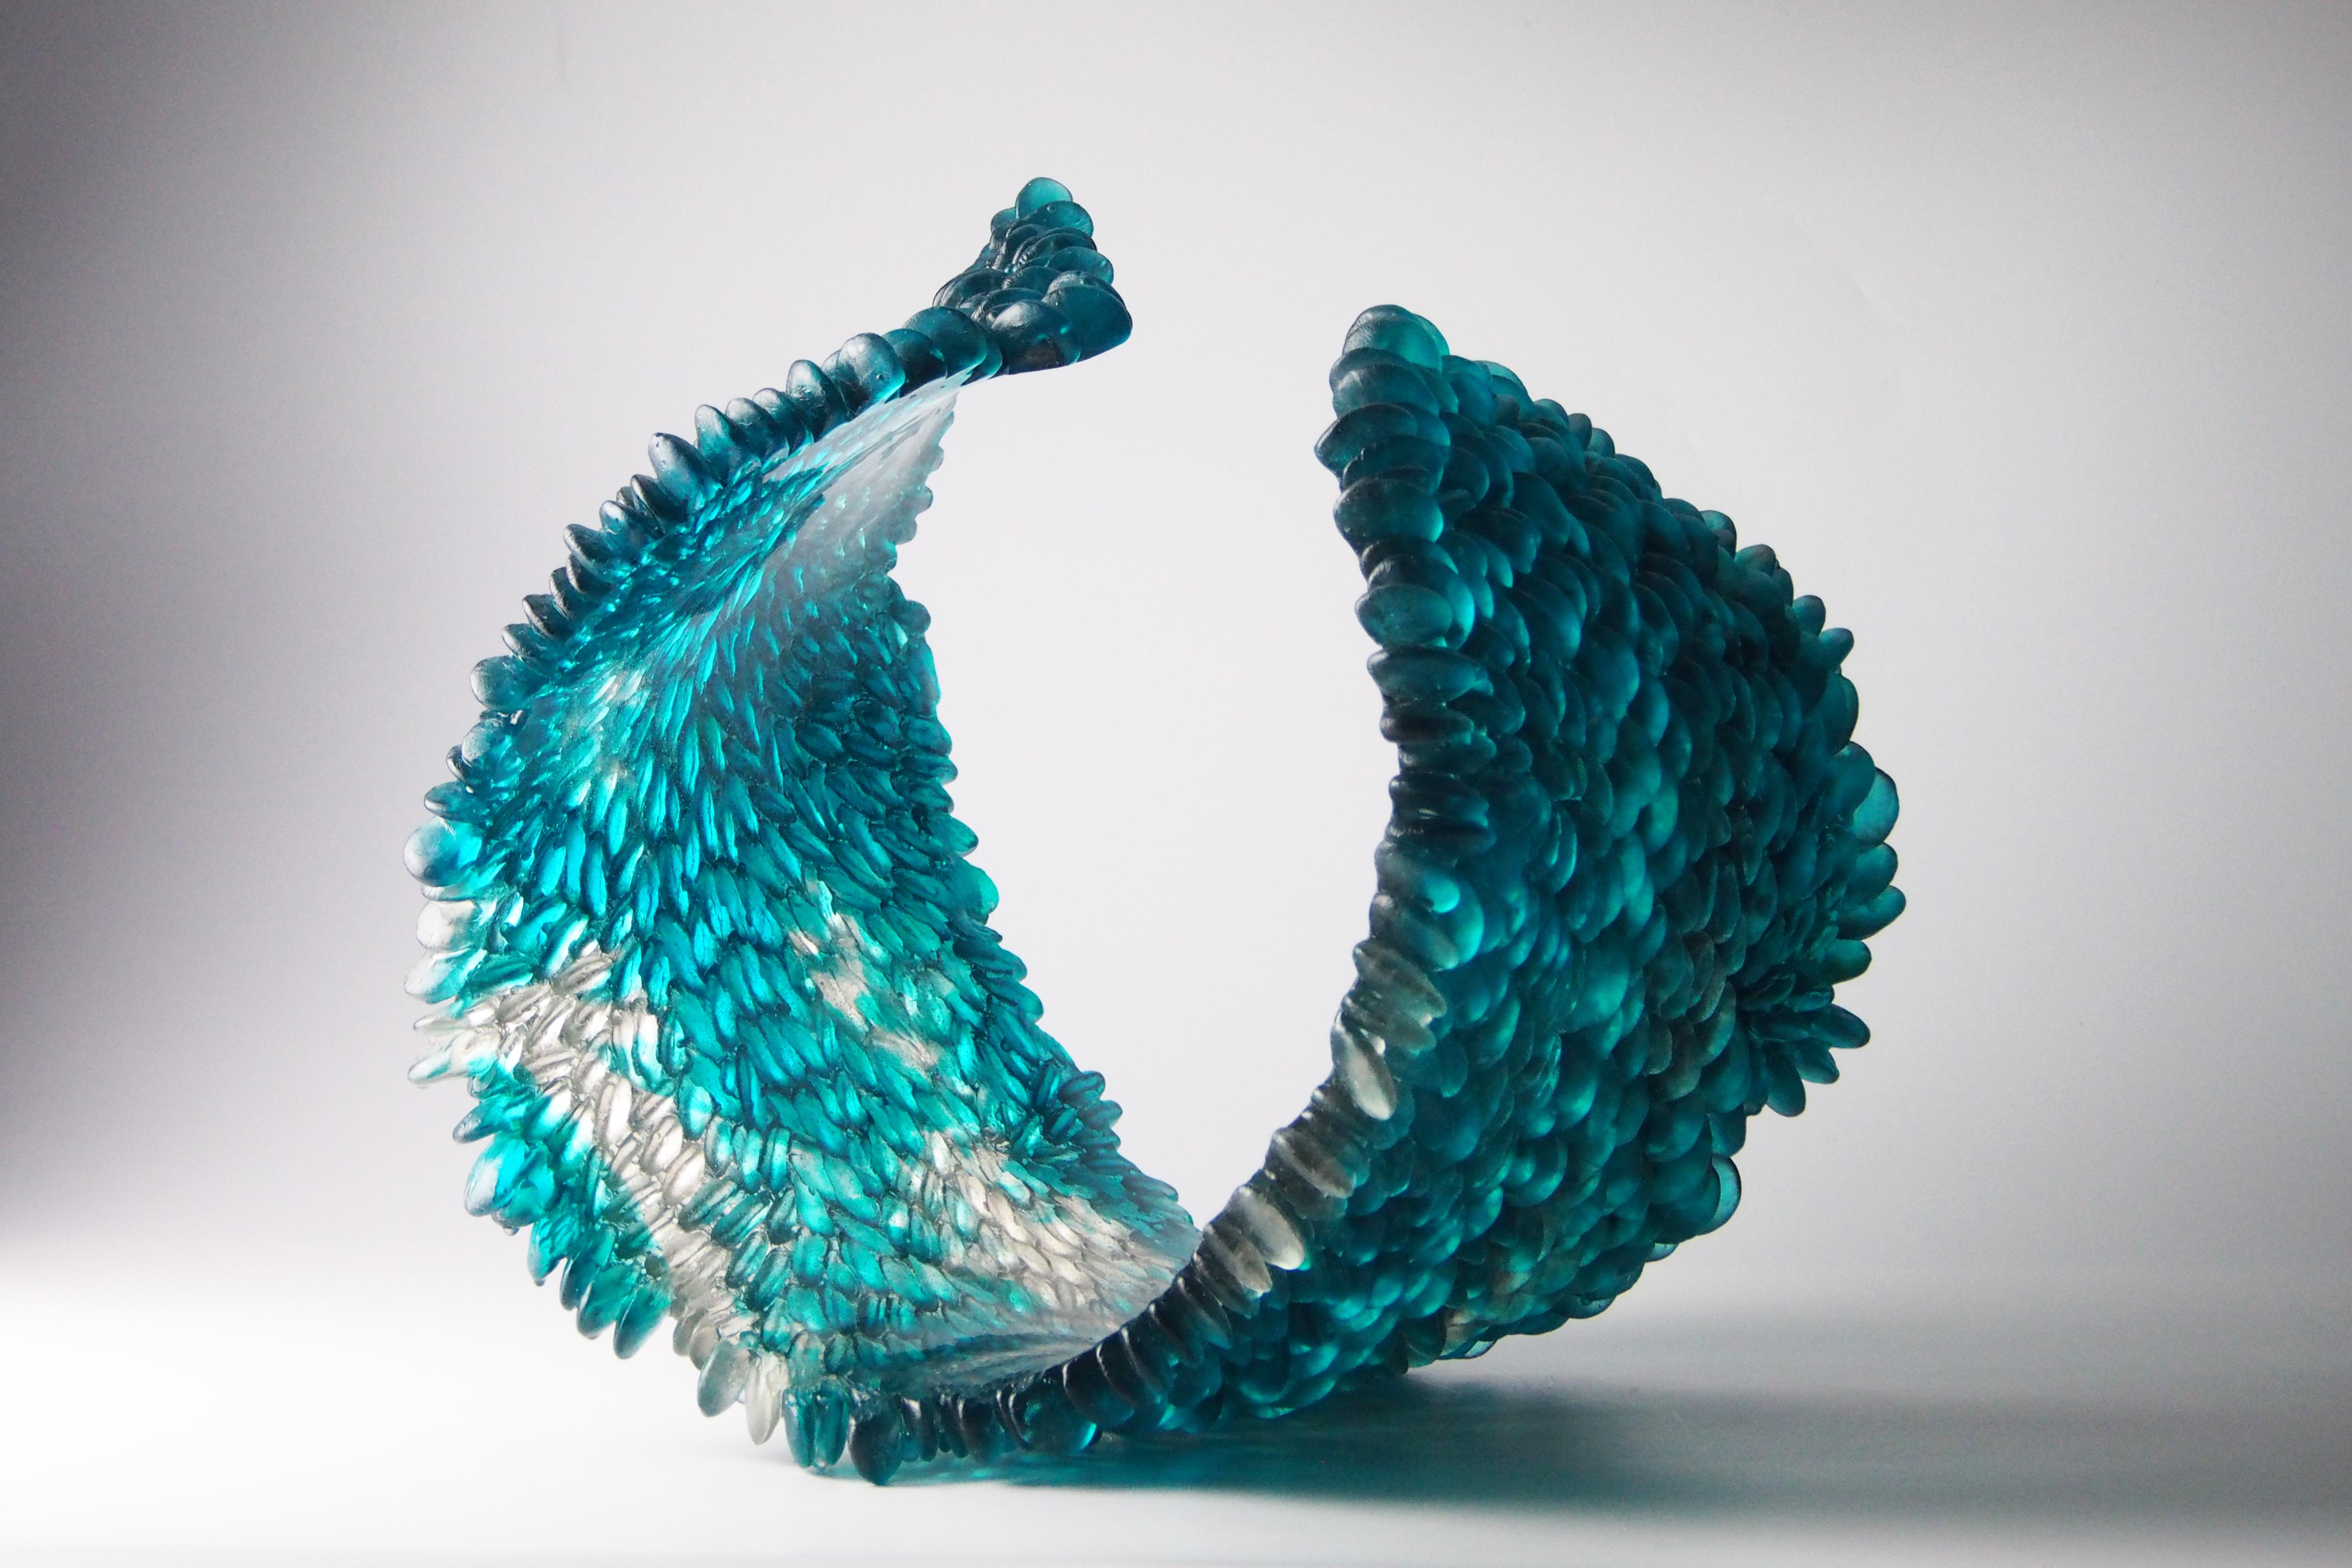 Organic Modern Curled Over V, a Unique Glass Sculpture in Teal & Grey by Nina Casson McGarva